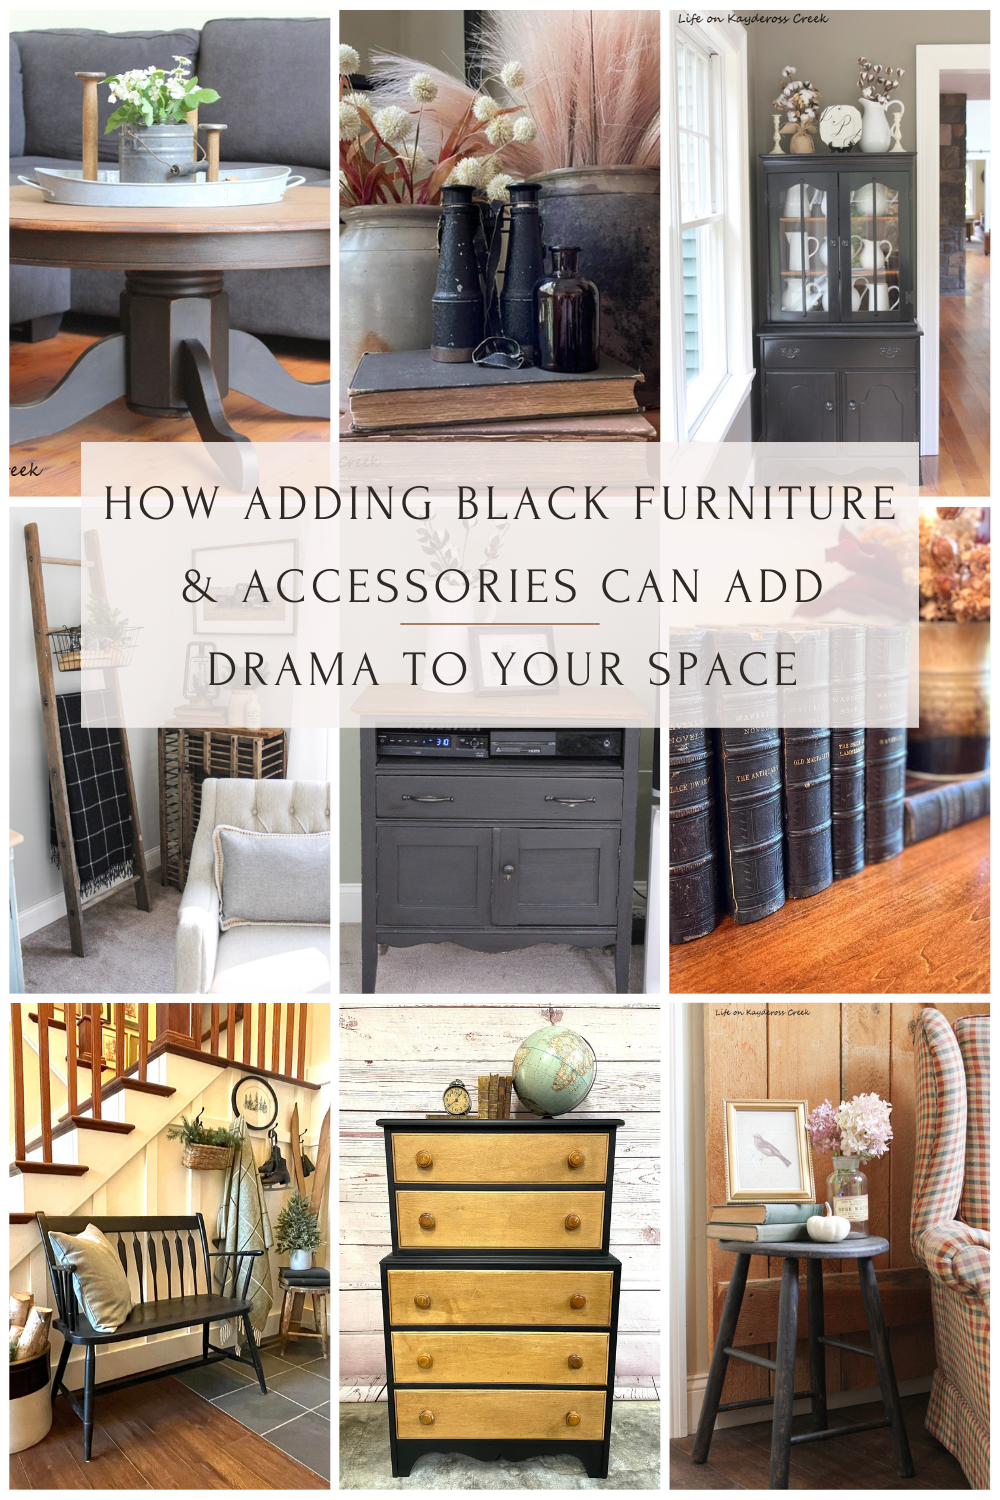 How Including Black Chalk Painted Furniture Can Add Drama to Your Space -  Life on Kaydeross Creek